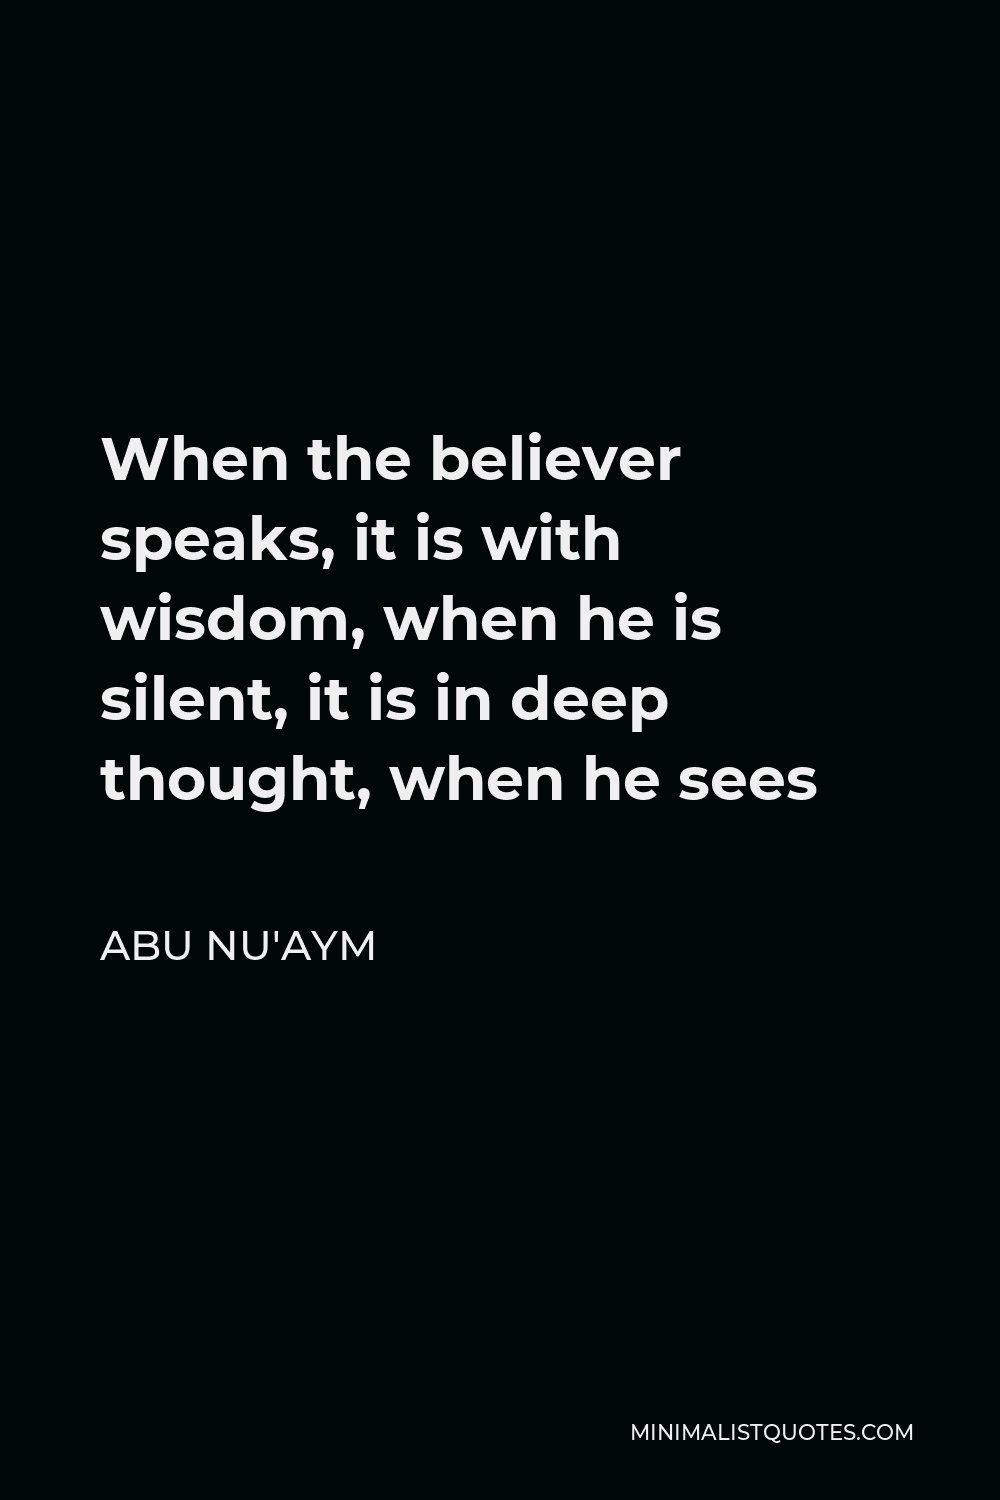 Abu Nu'aym Quote - When the believer speaks, it is with wisdom, when he is silent, it is in deep thought, when he sees